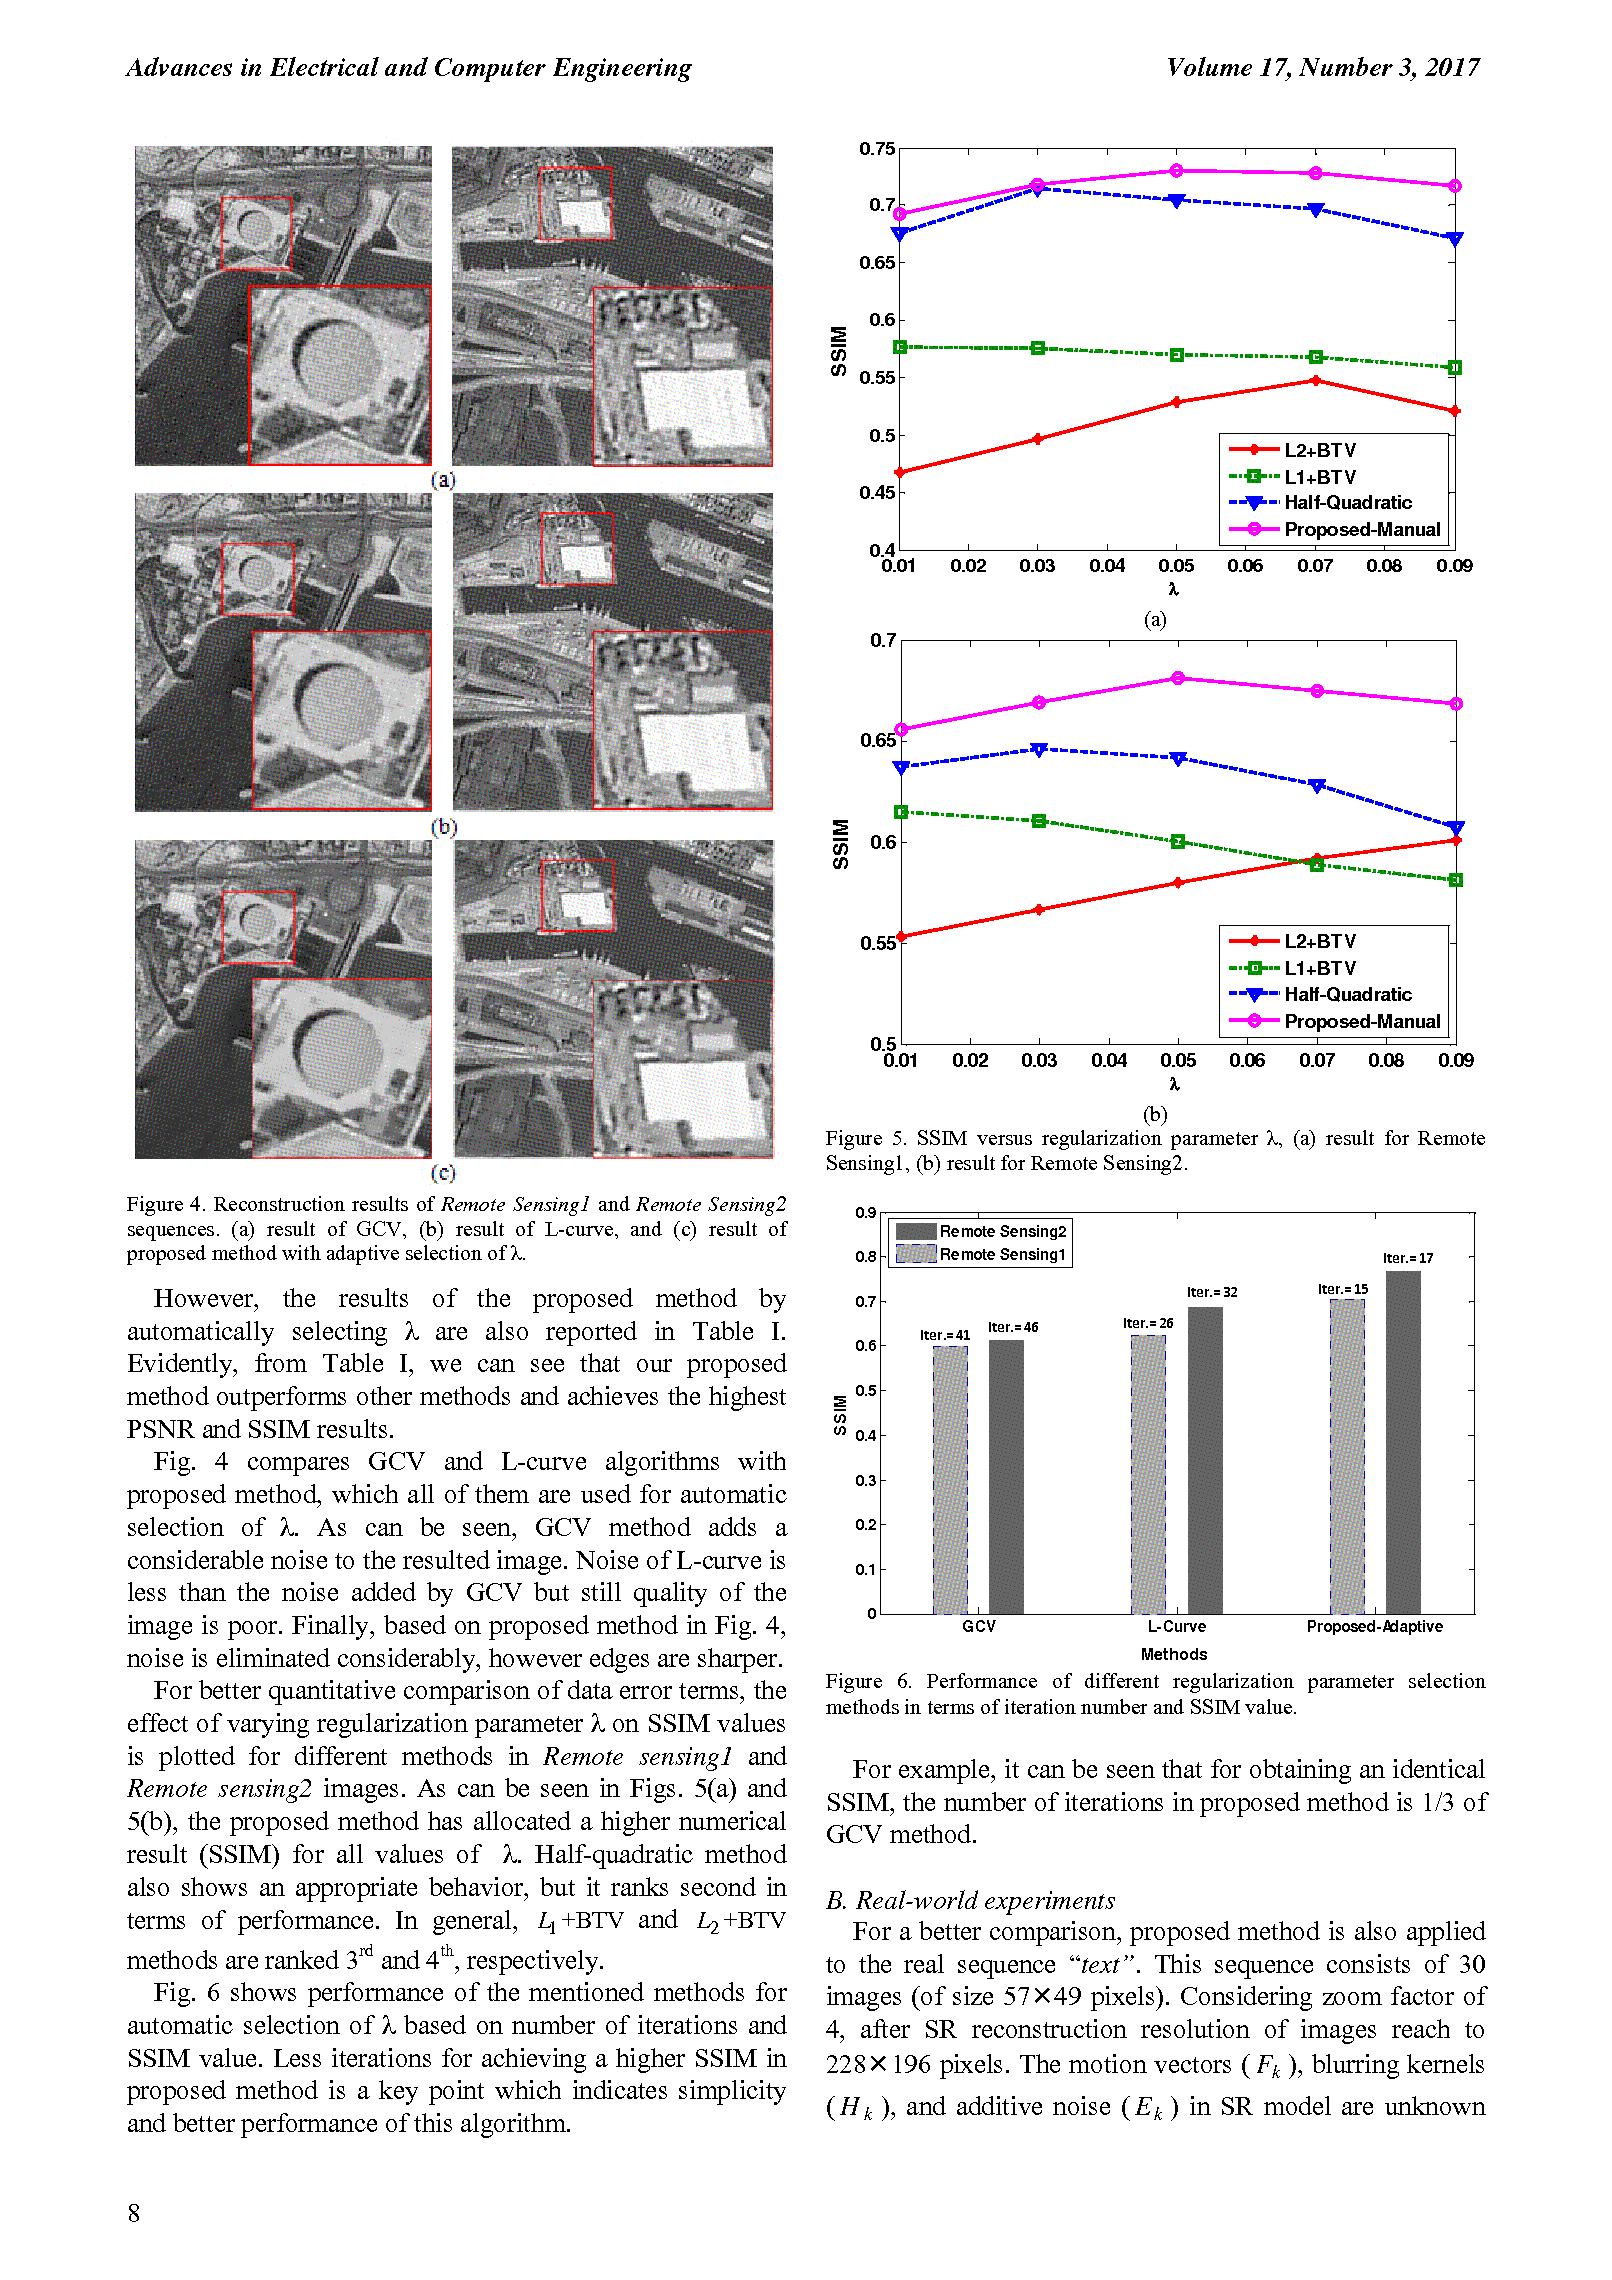 PDF Quickview for paper with DOI:10.4316/AECE.2017.03001